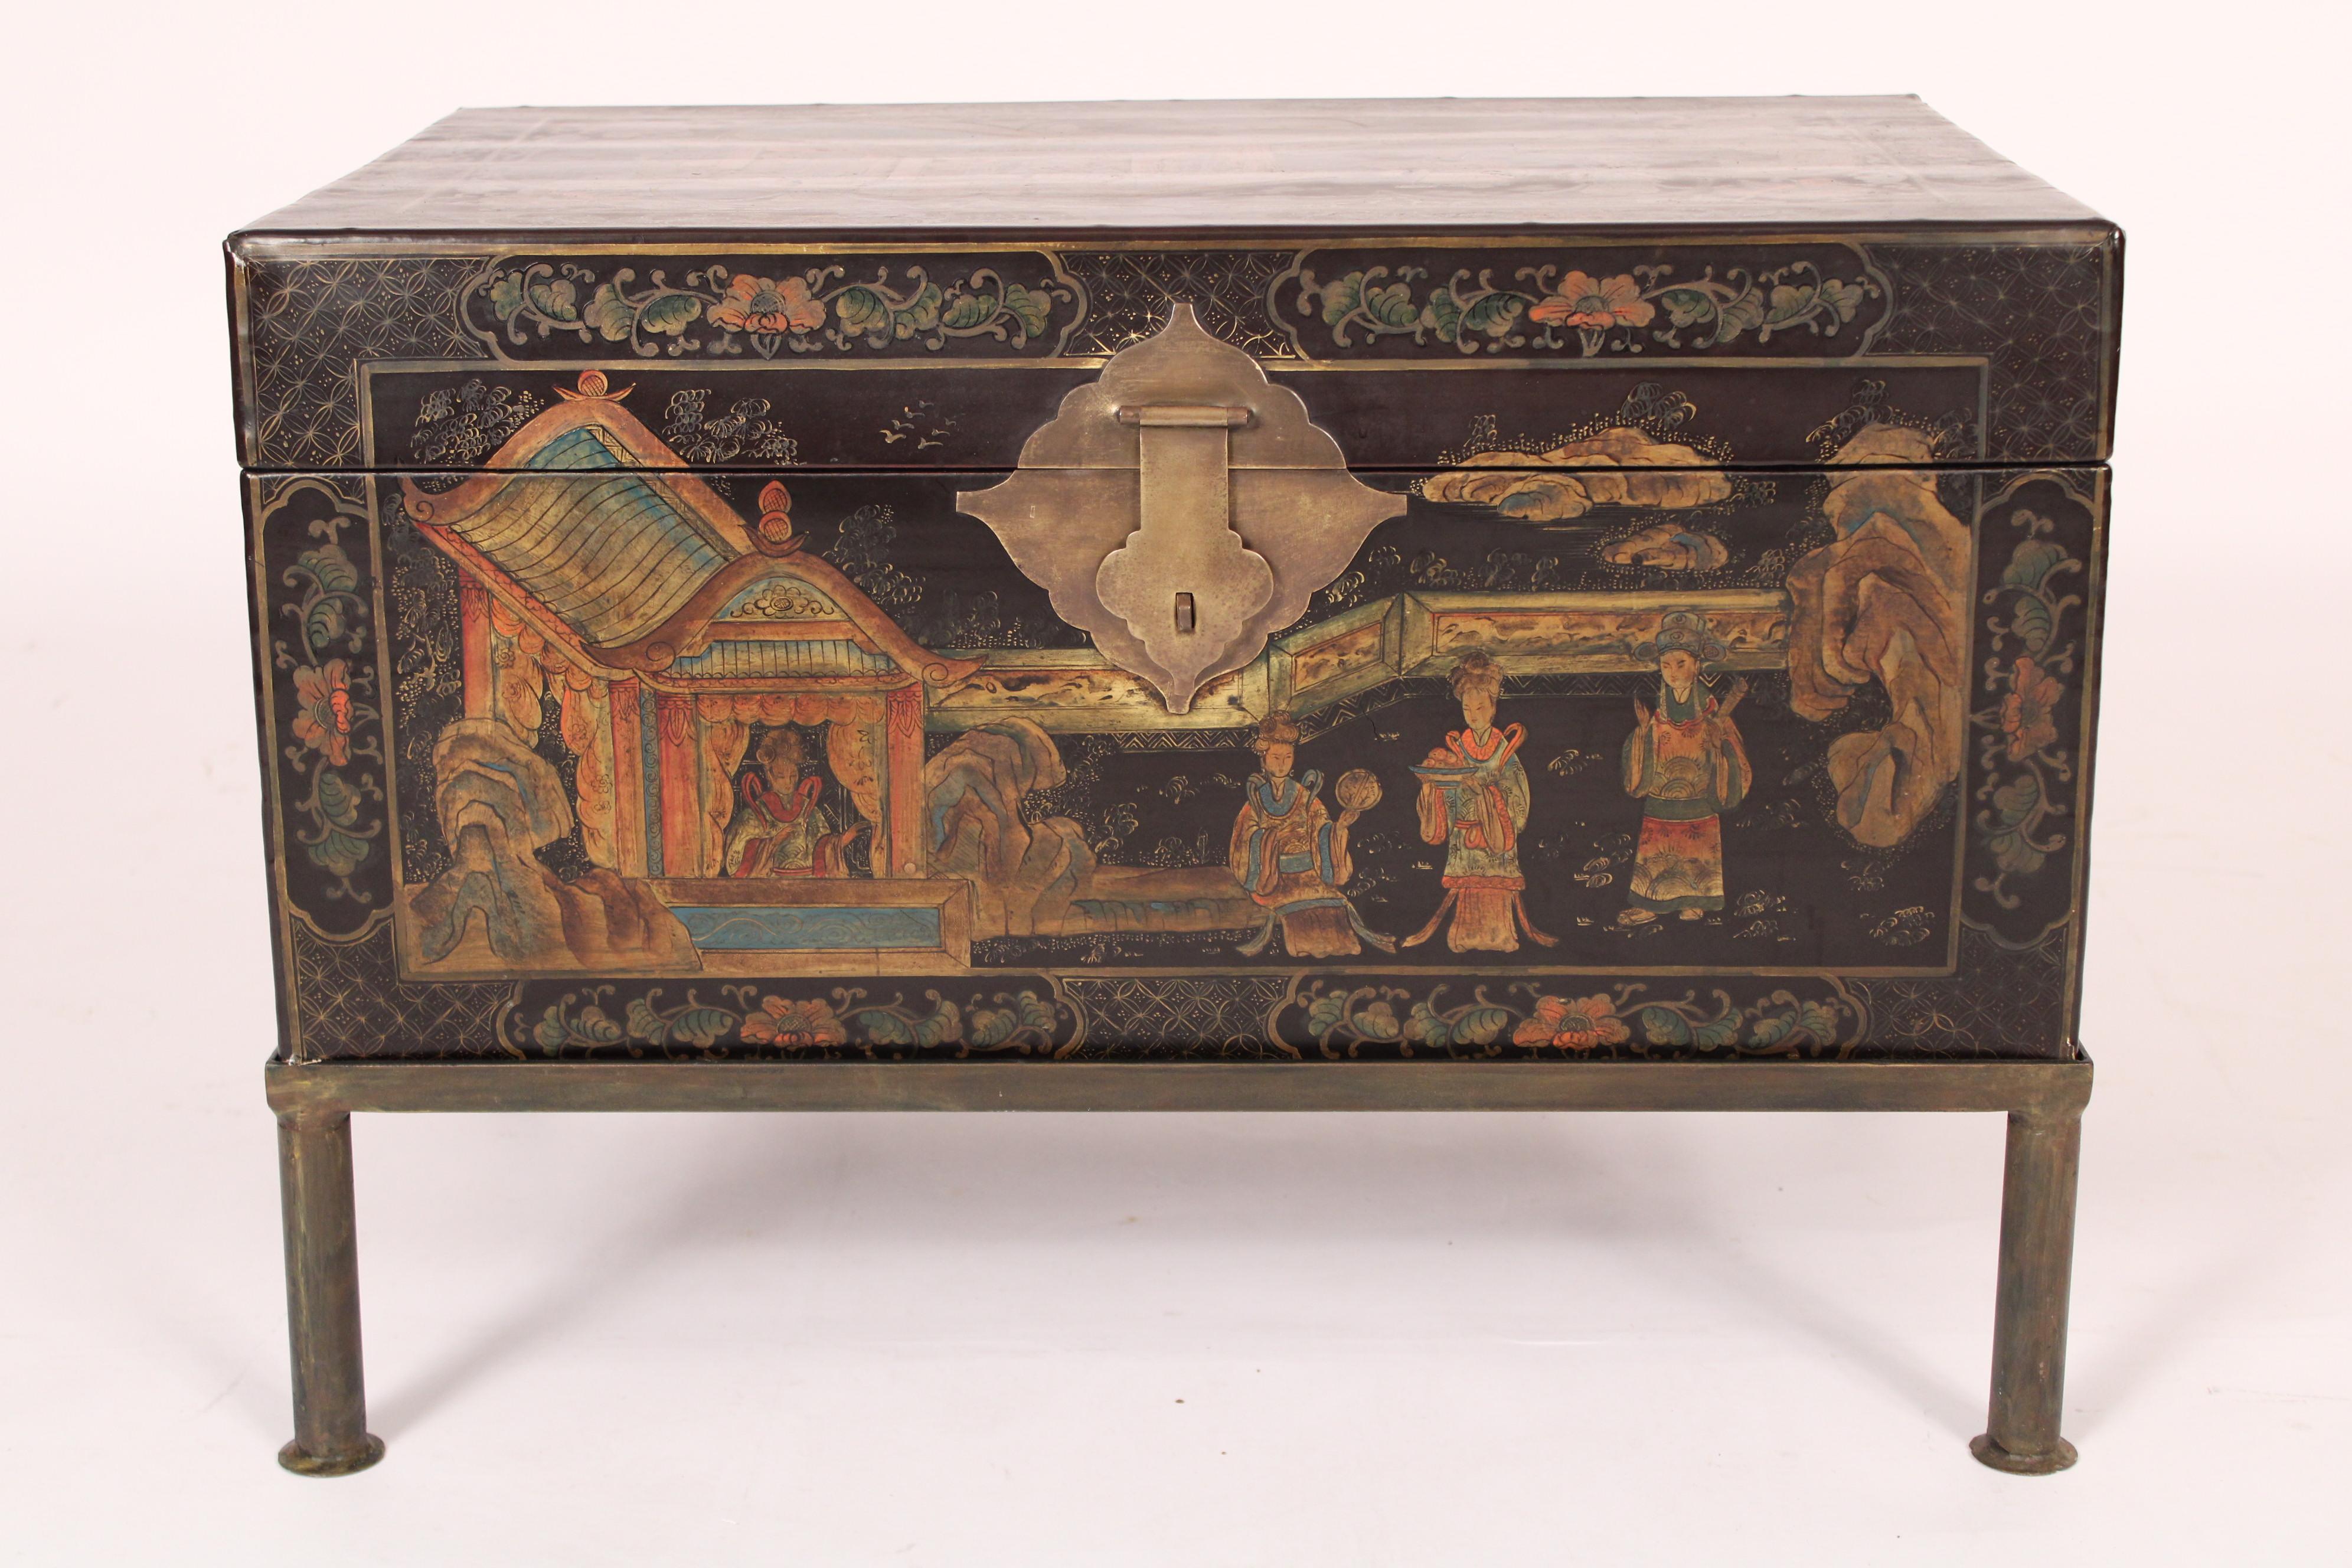 chinoiserie style trunk, circa 1950s on a late 20th century iron base. chinoiserie style decorated wood trunk, with tea house and figures on the front and top, the sides and back decorated with vases and flowers.